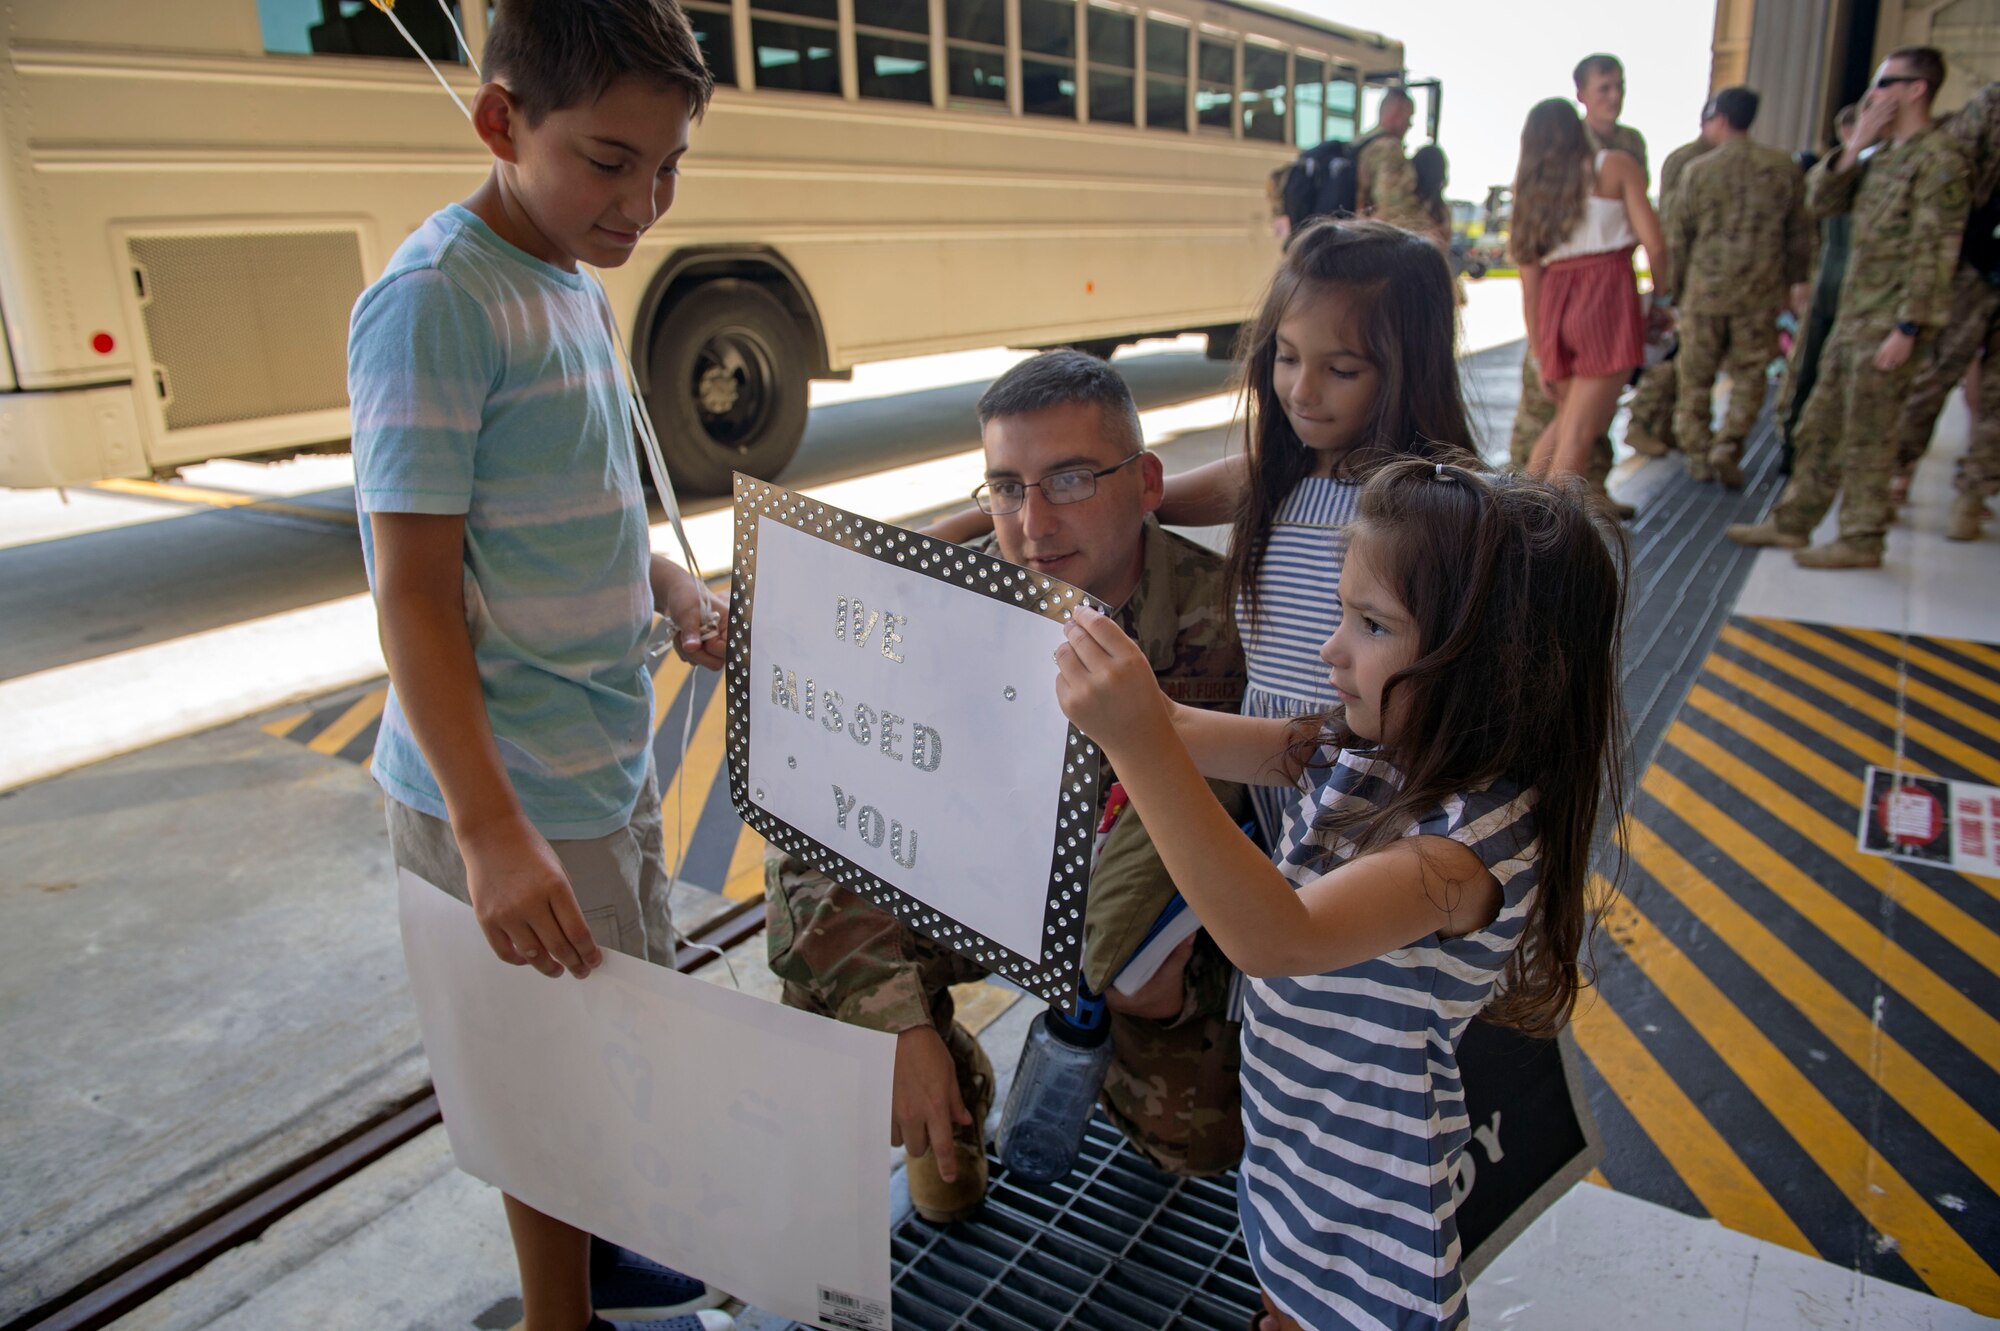 Senior Master Sgt. Alejandro Munoz, 723d Aircraft Maintenance Squadron superintendent, reunites with his family during a 41st Rescue Squadron redeployment ceremony, July 10, 2018, at Moody Air Force Base, Ga.  While deployed, the 41st RQS and 41st Helicopter Maintenance Unit provided combat search and rescue capabilities and maintenance operations in support of Combined Joint Task Force-Horn of Africa. (U.S Air Force photo by Senior Airman Greg Nash)